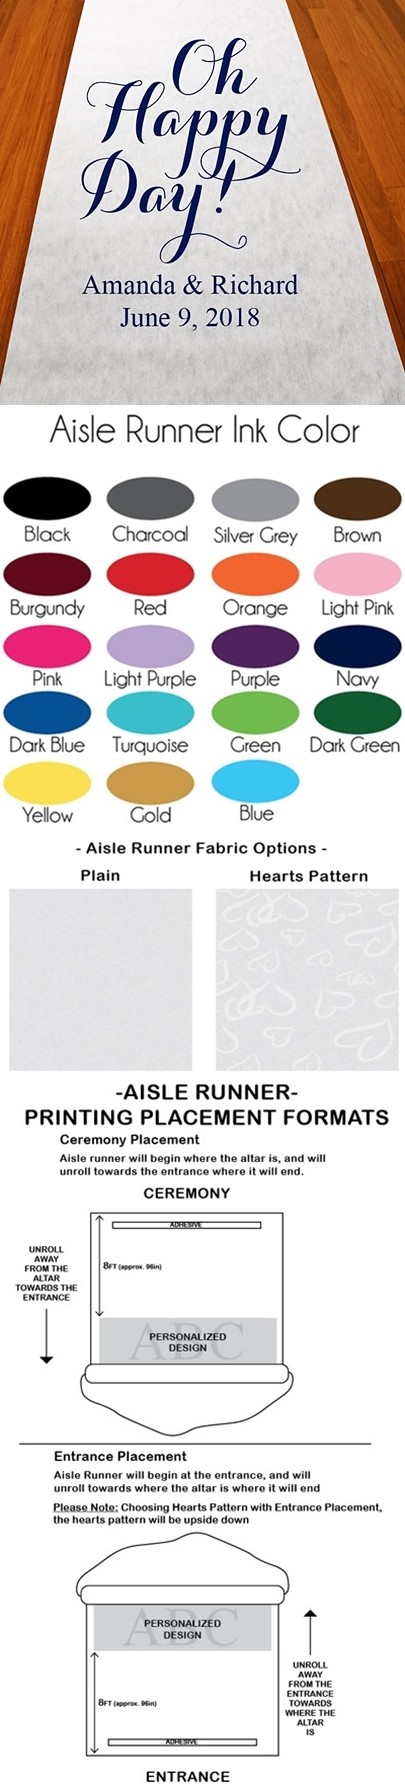 Personalized "Oh Happy Day!" Aisle Runner (19 Colors)